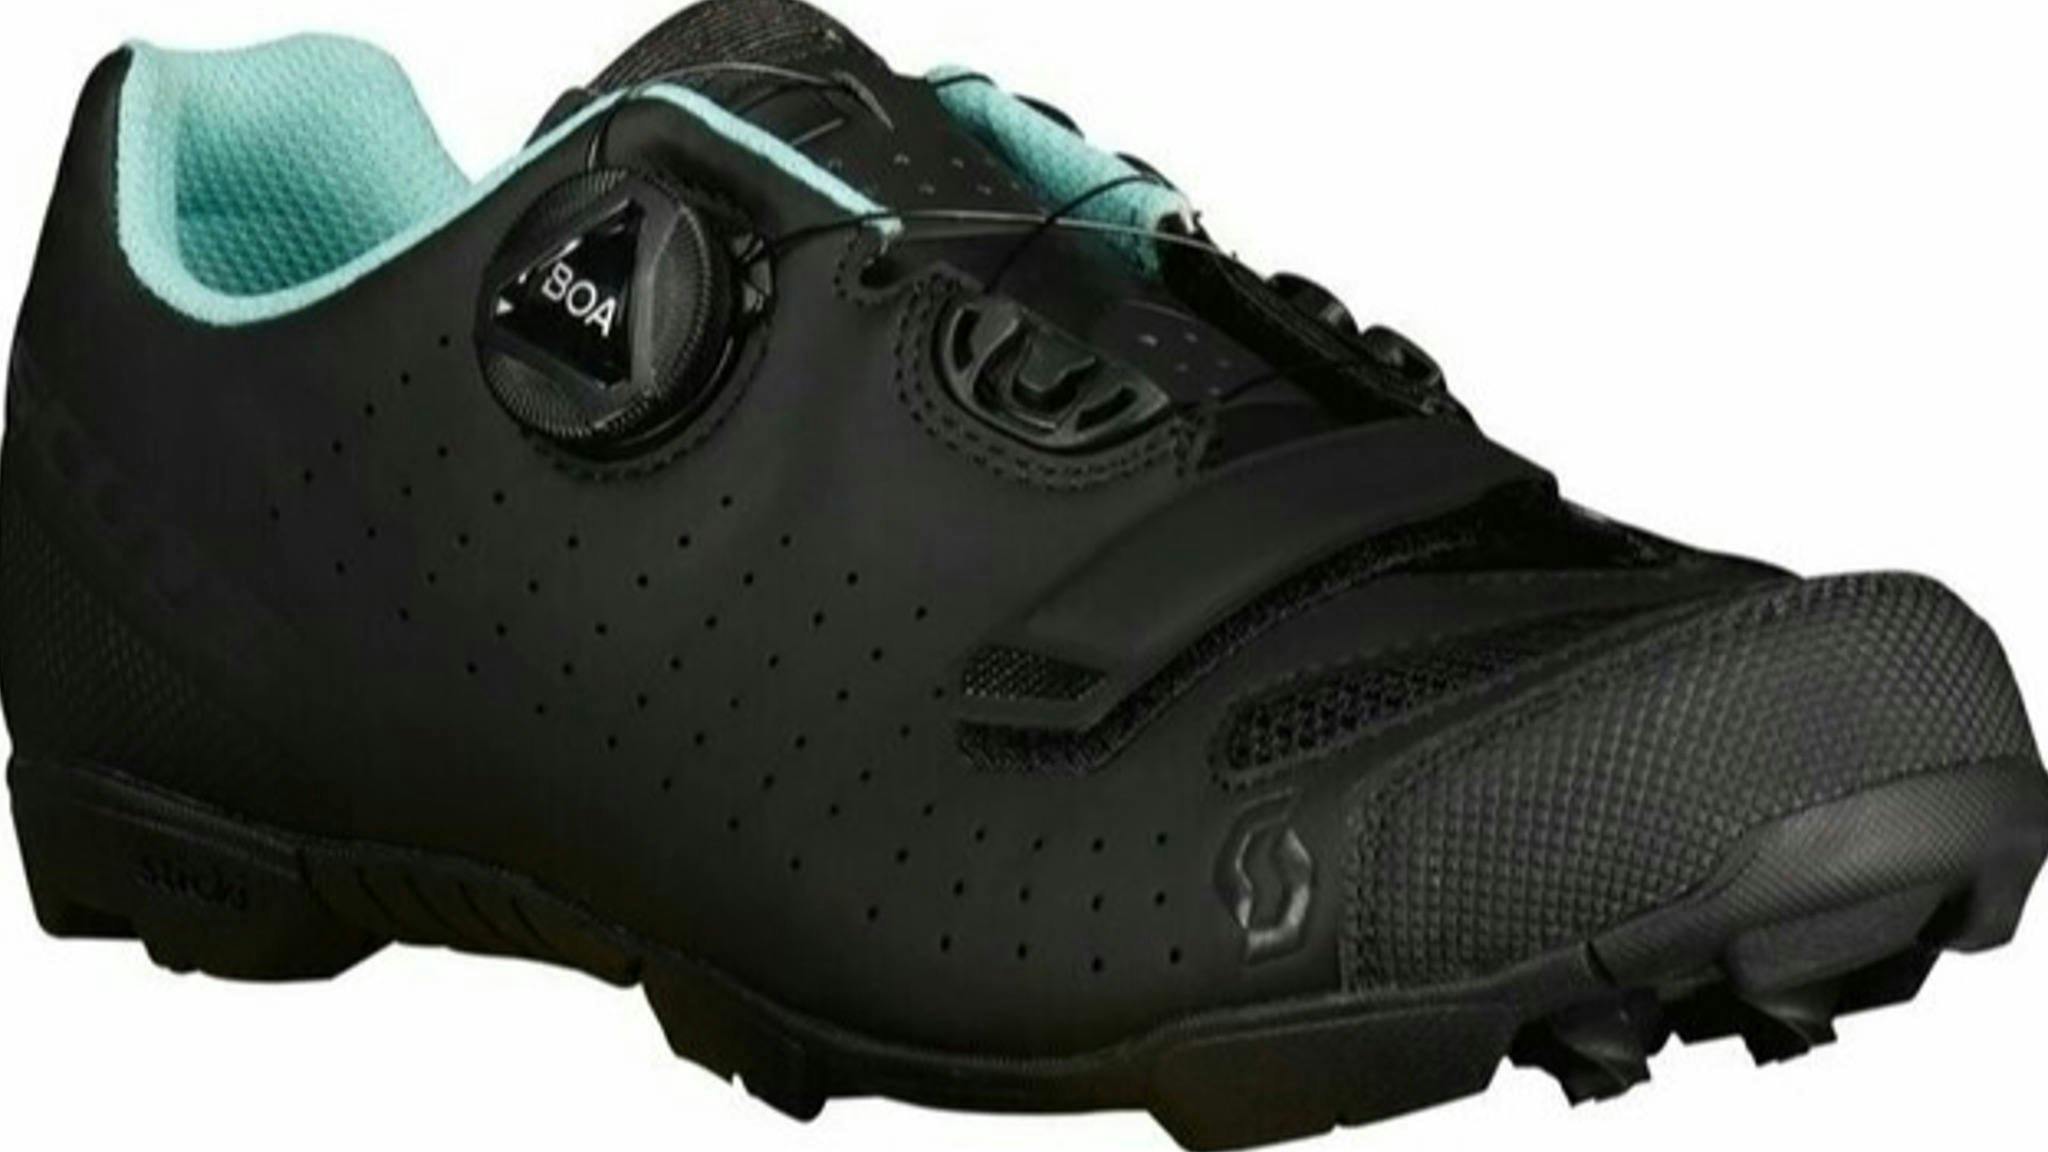 Product image for MTB Comp Boa Shoes - Women's